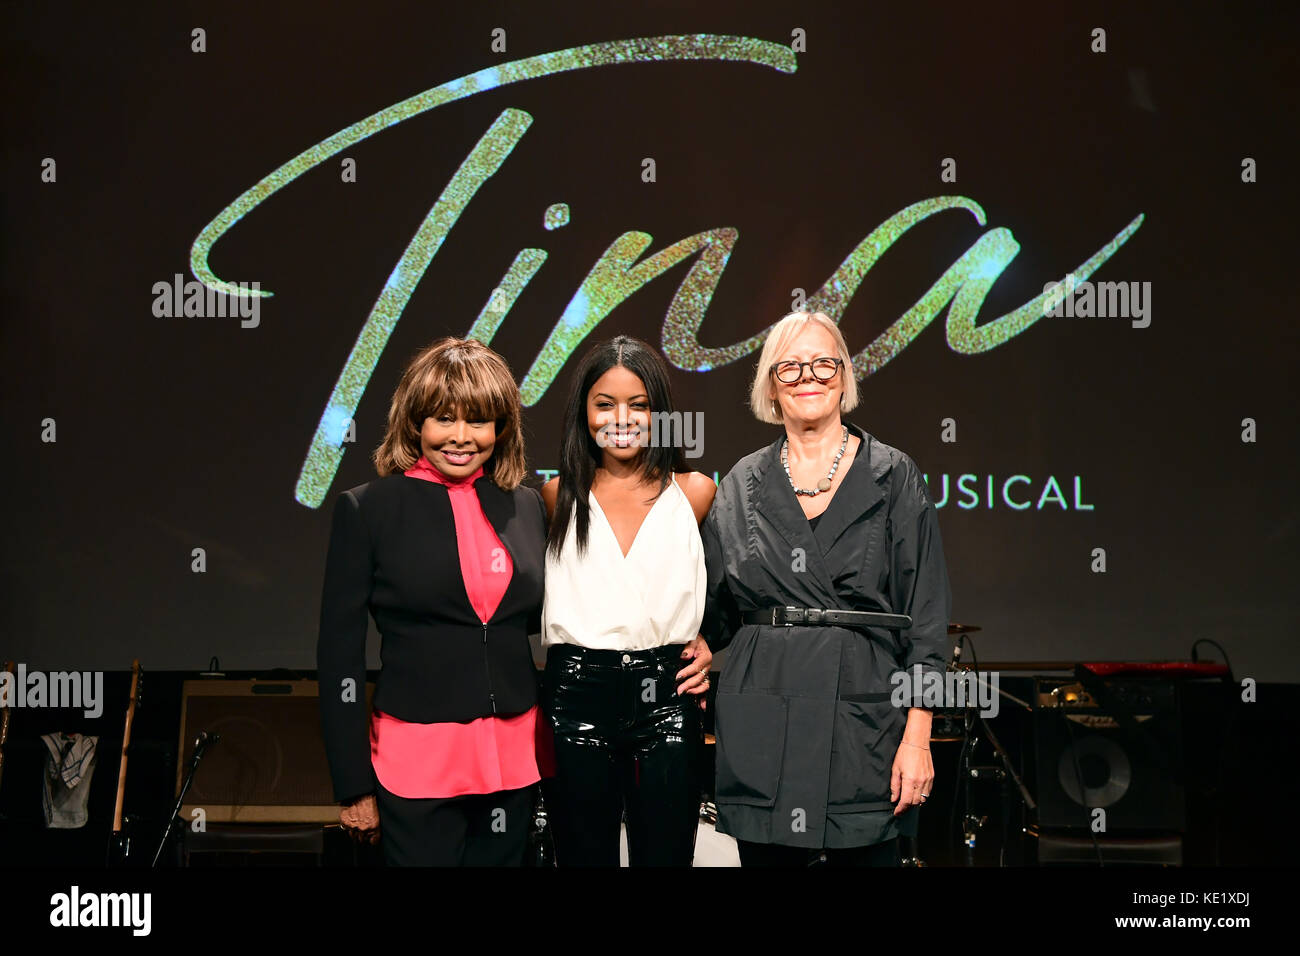 (left to right) Tina Turner, Adrienne Warren and Phyllida Lloyd attending the photocall for the new west end musical Tina, based on the music of Tina Turner held at the Hospital Club, London. Stock Photo